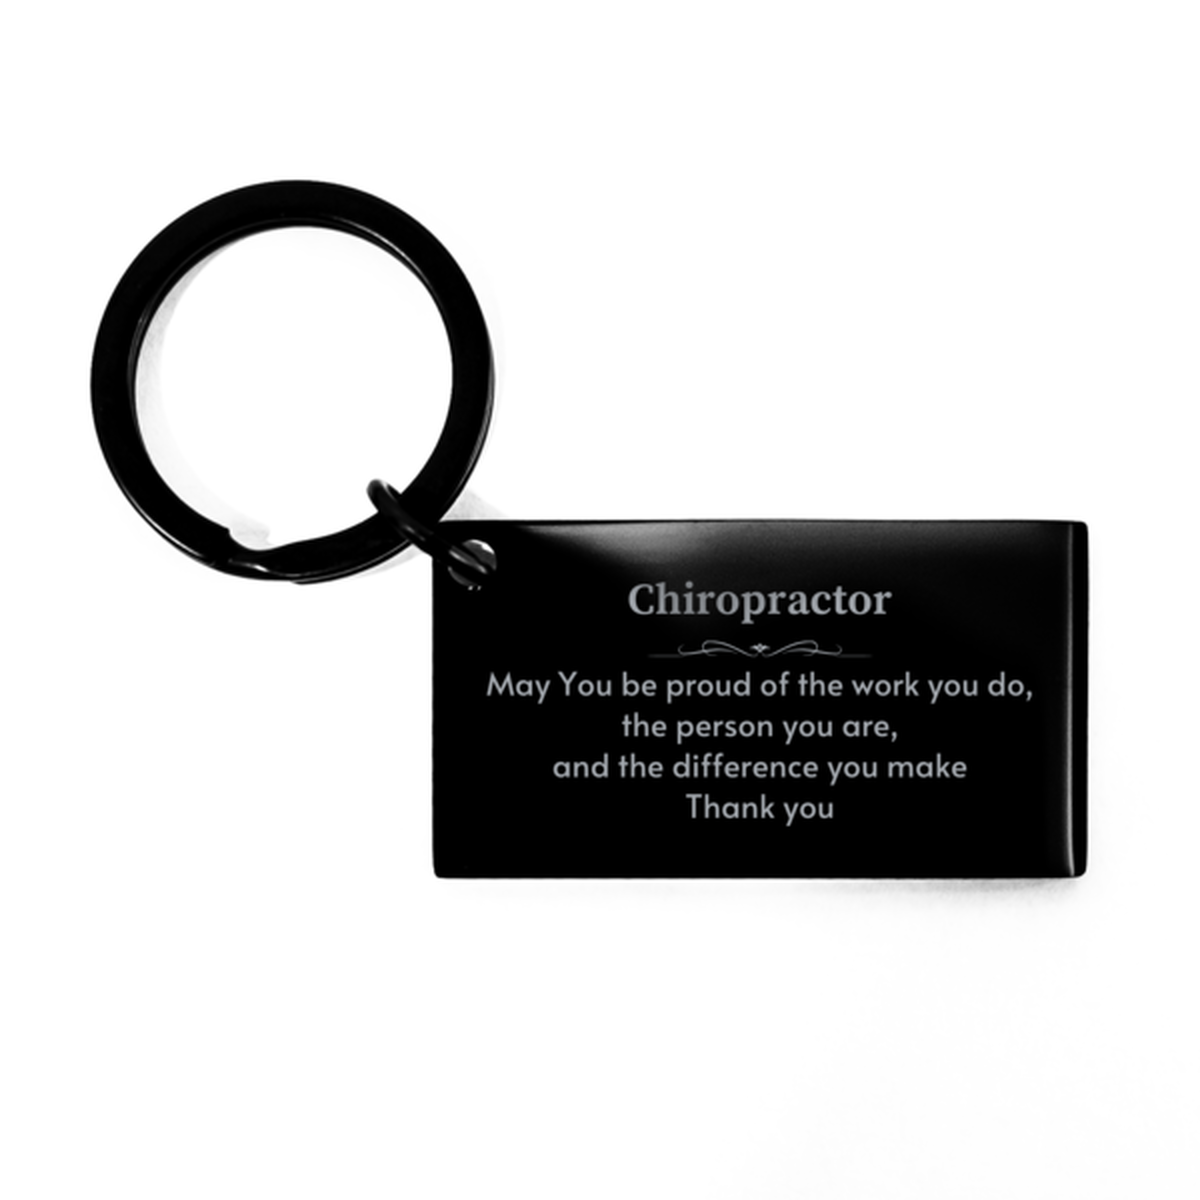 Heartwarming Keychain Retirement Coworkers Gifts for Chiropractor, Dispatcher May You be proud of the work you do, the person you are Gifts for Boss Men Women Friends